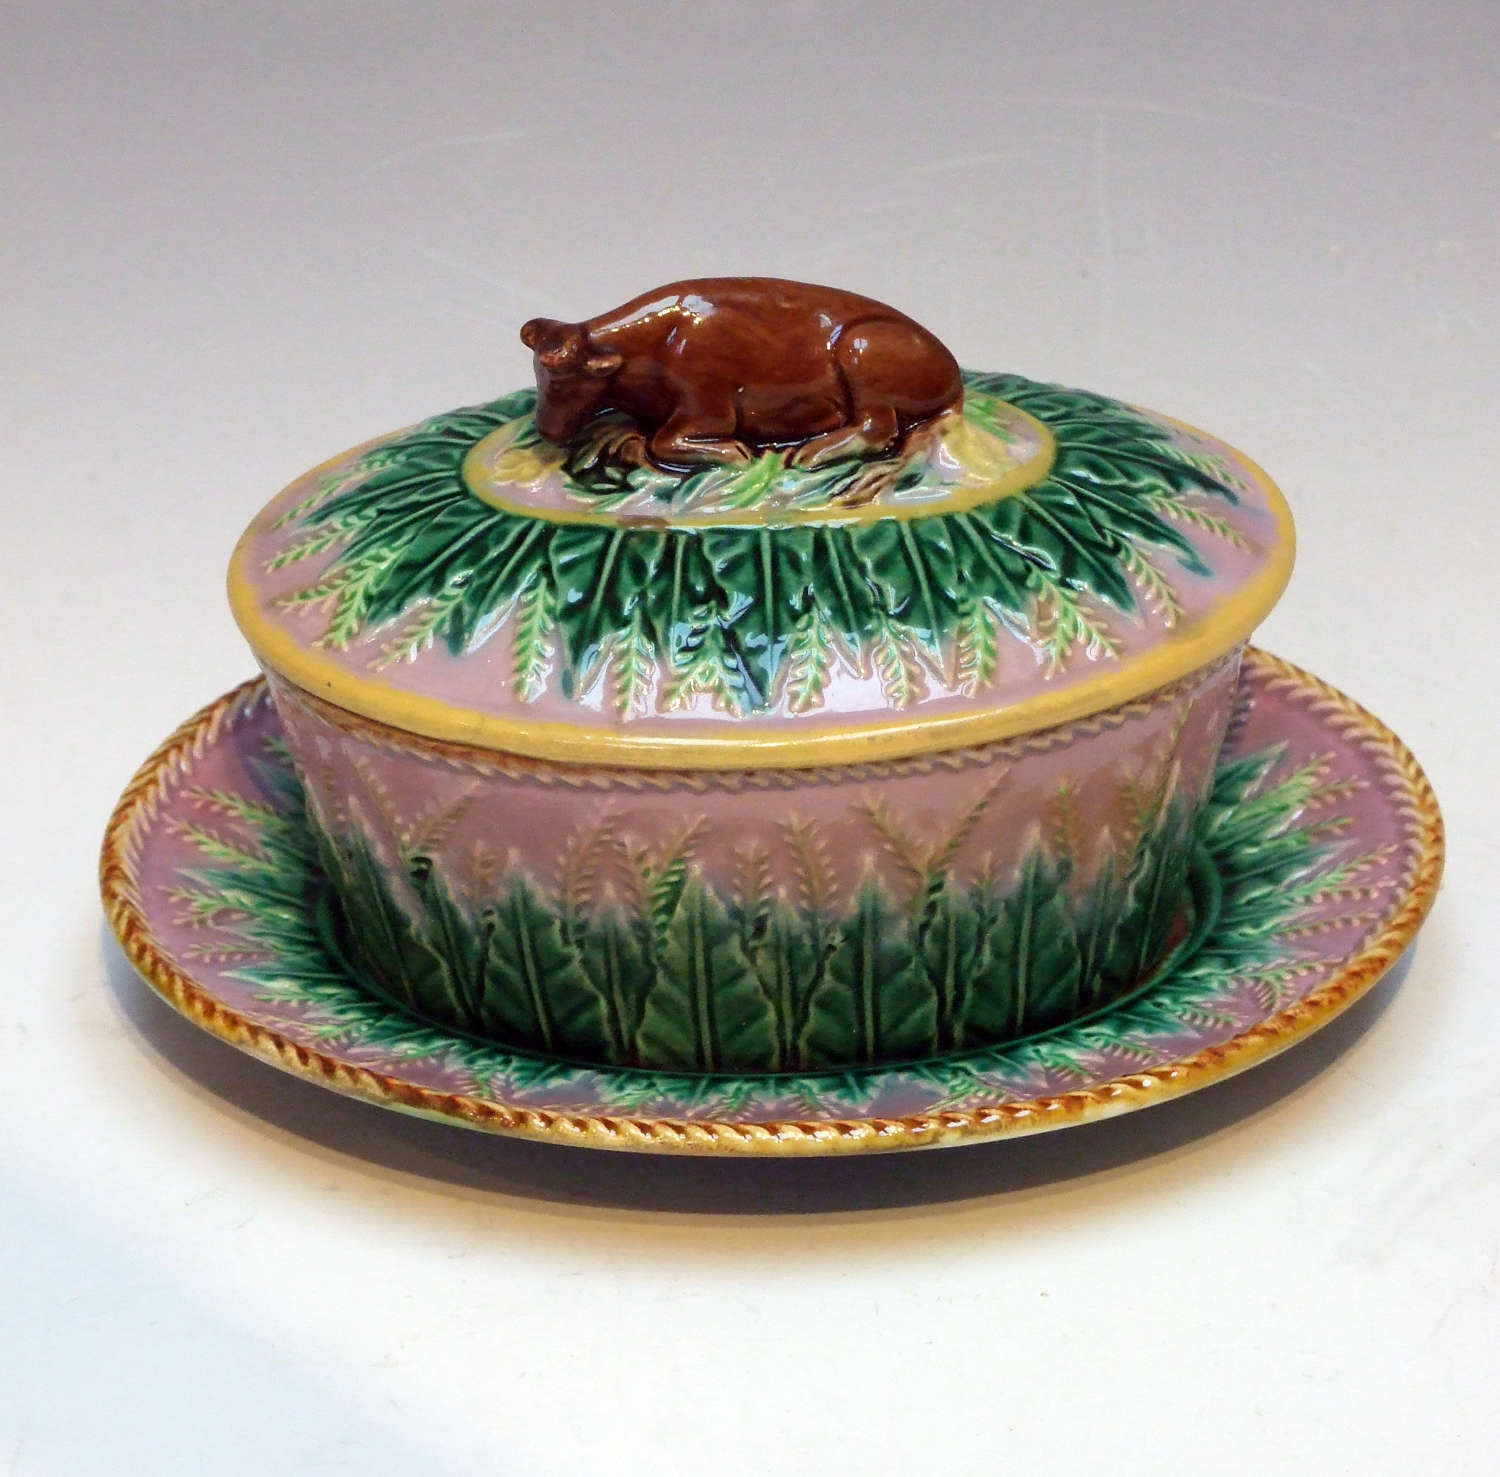 Rare George Jones majolica lilac ground cow finial butter dish